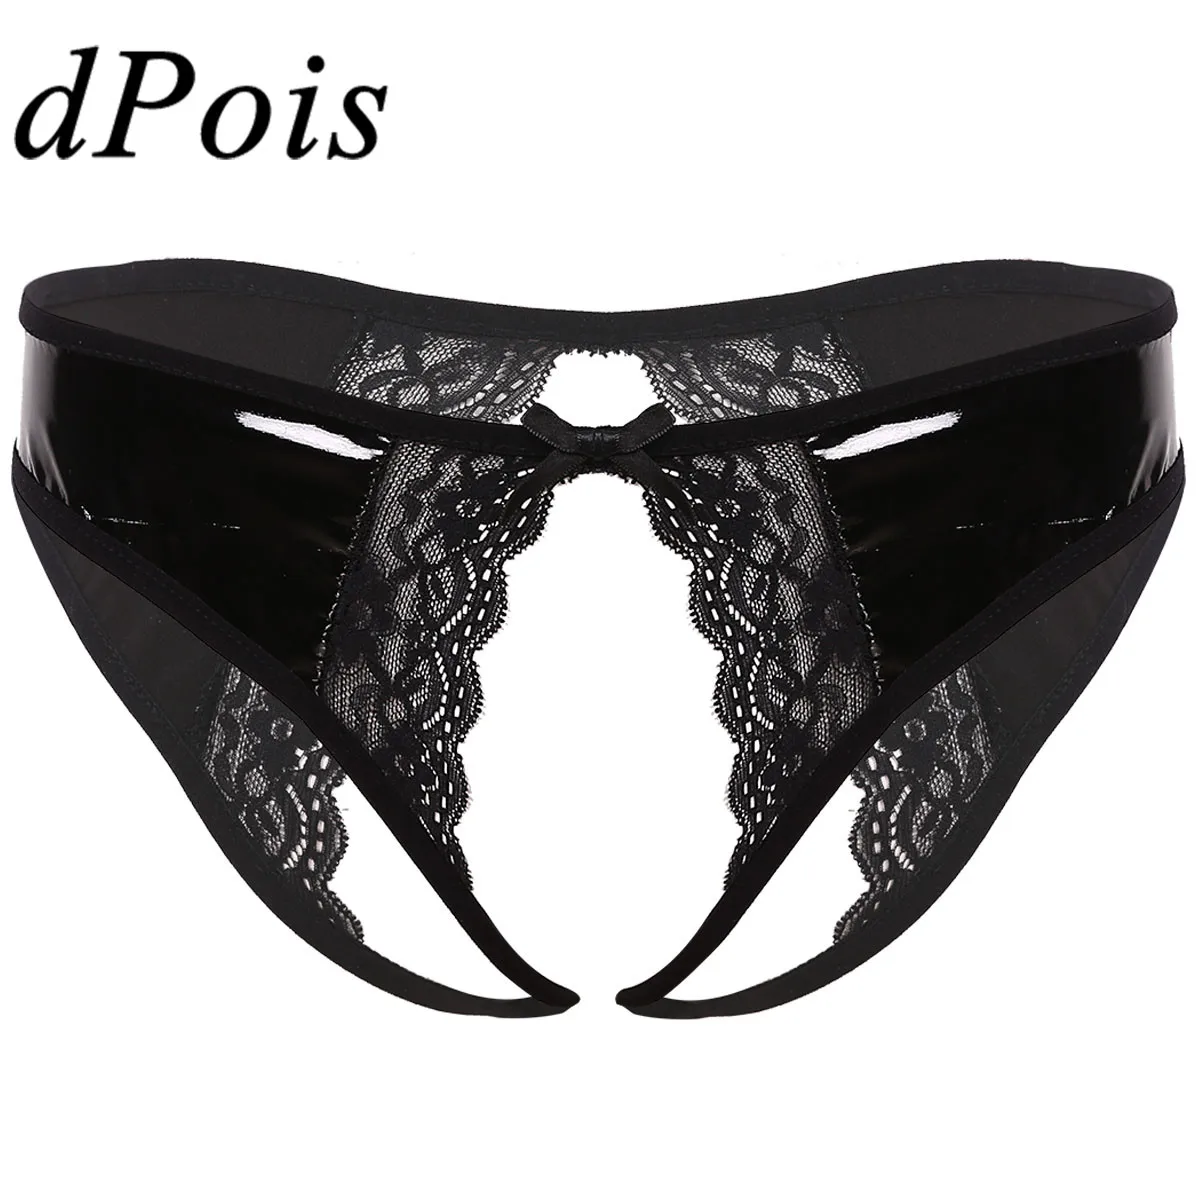 

Womens Wet Look Patent Leather Lingerie Sexy Female Low Rise Crotchless Panties with Lace Edge Cheeky Hipster Briefs Underwear